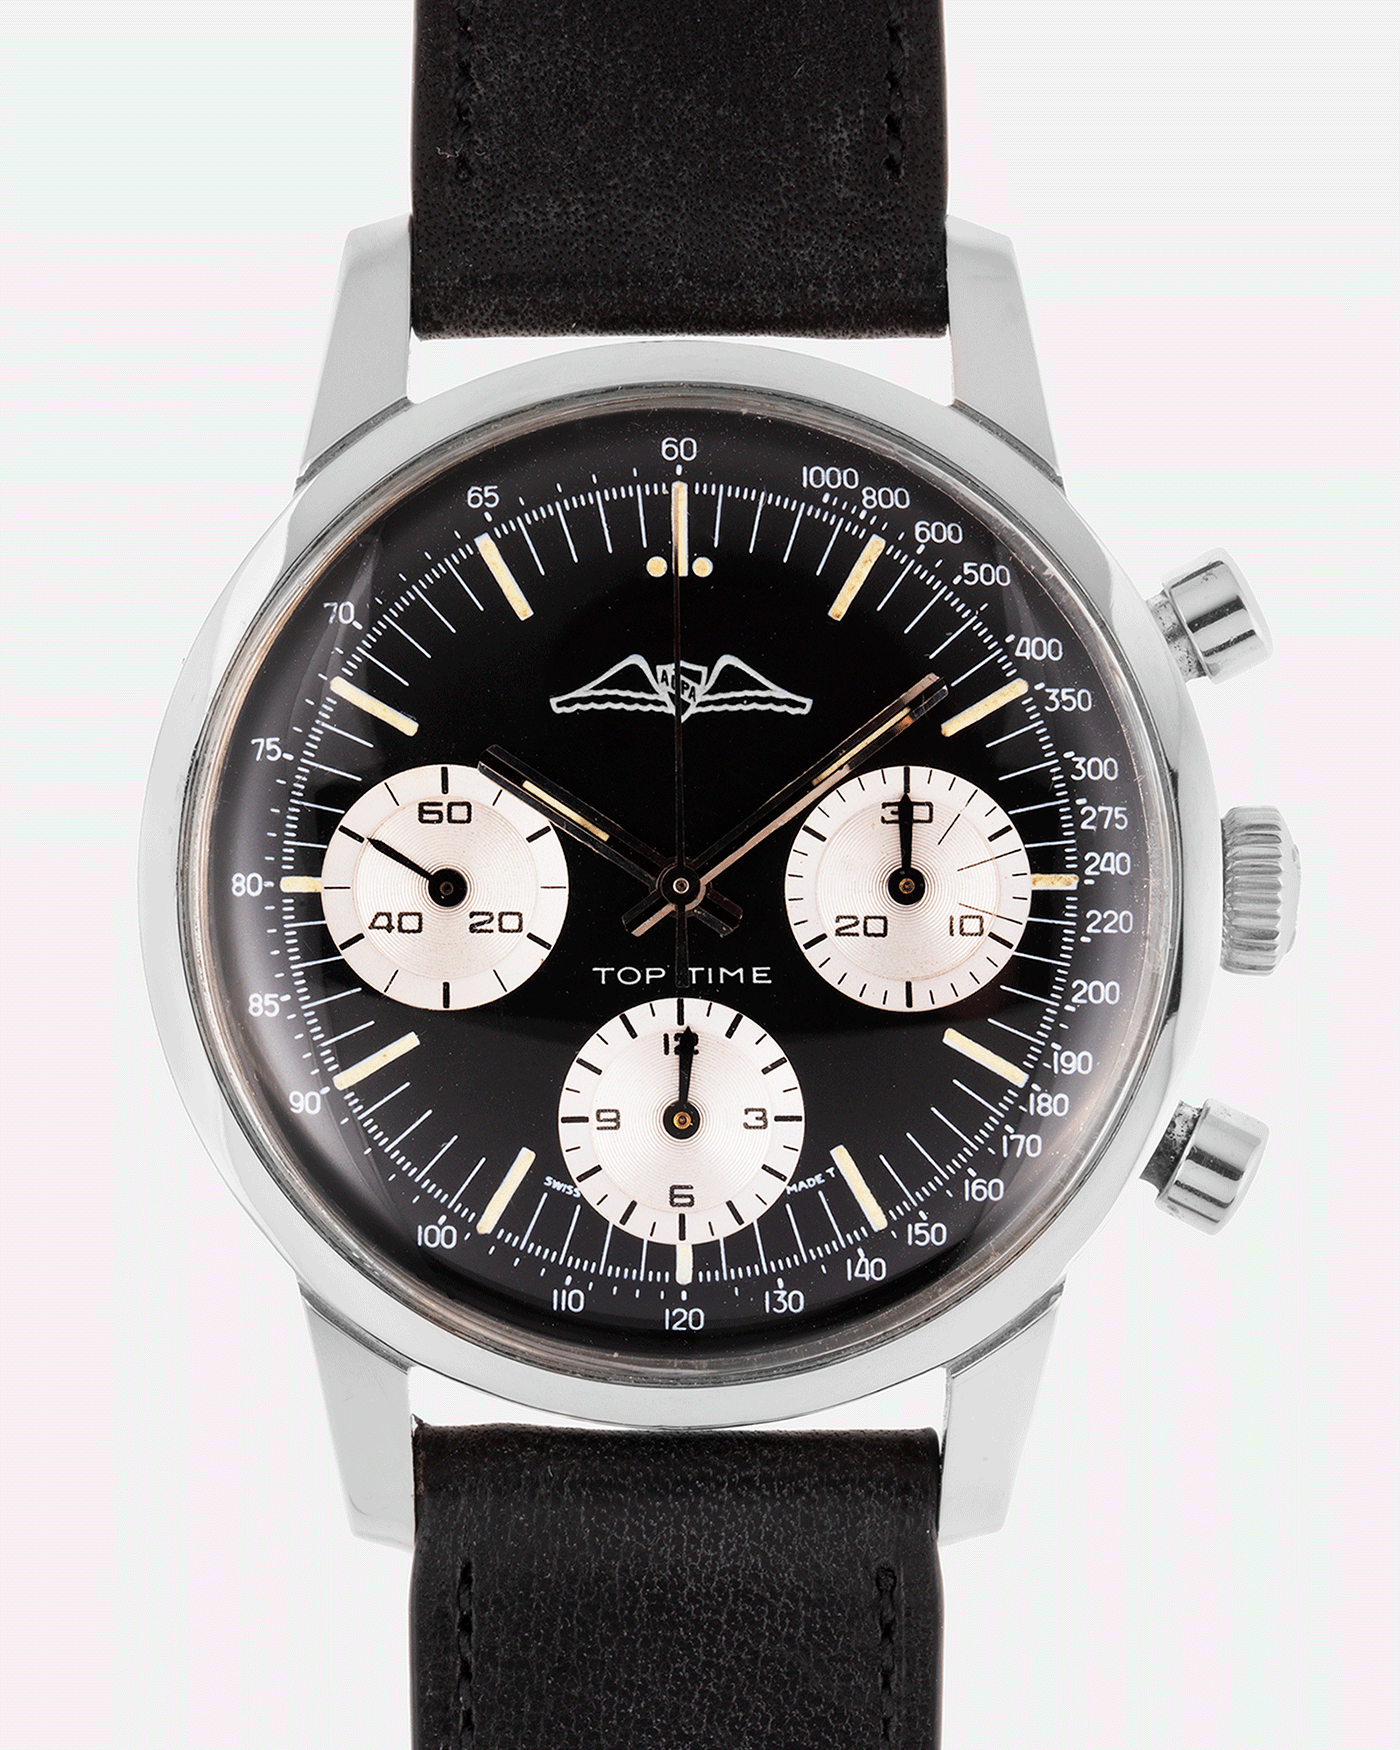 Breitling Top Time Ref. 810 AOPA Vintage Racing Chronograph Watch | S.Song Vintage Watches For Sale